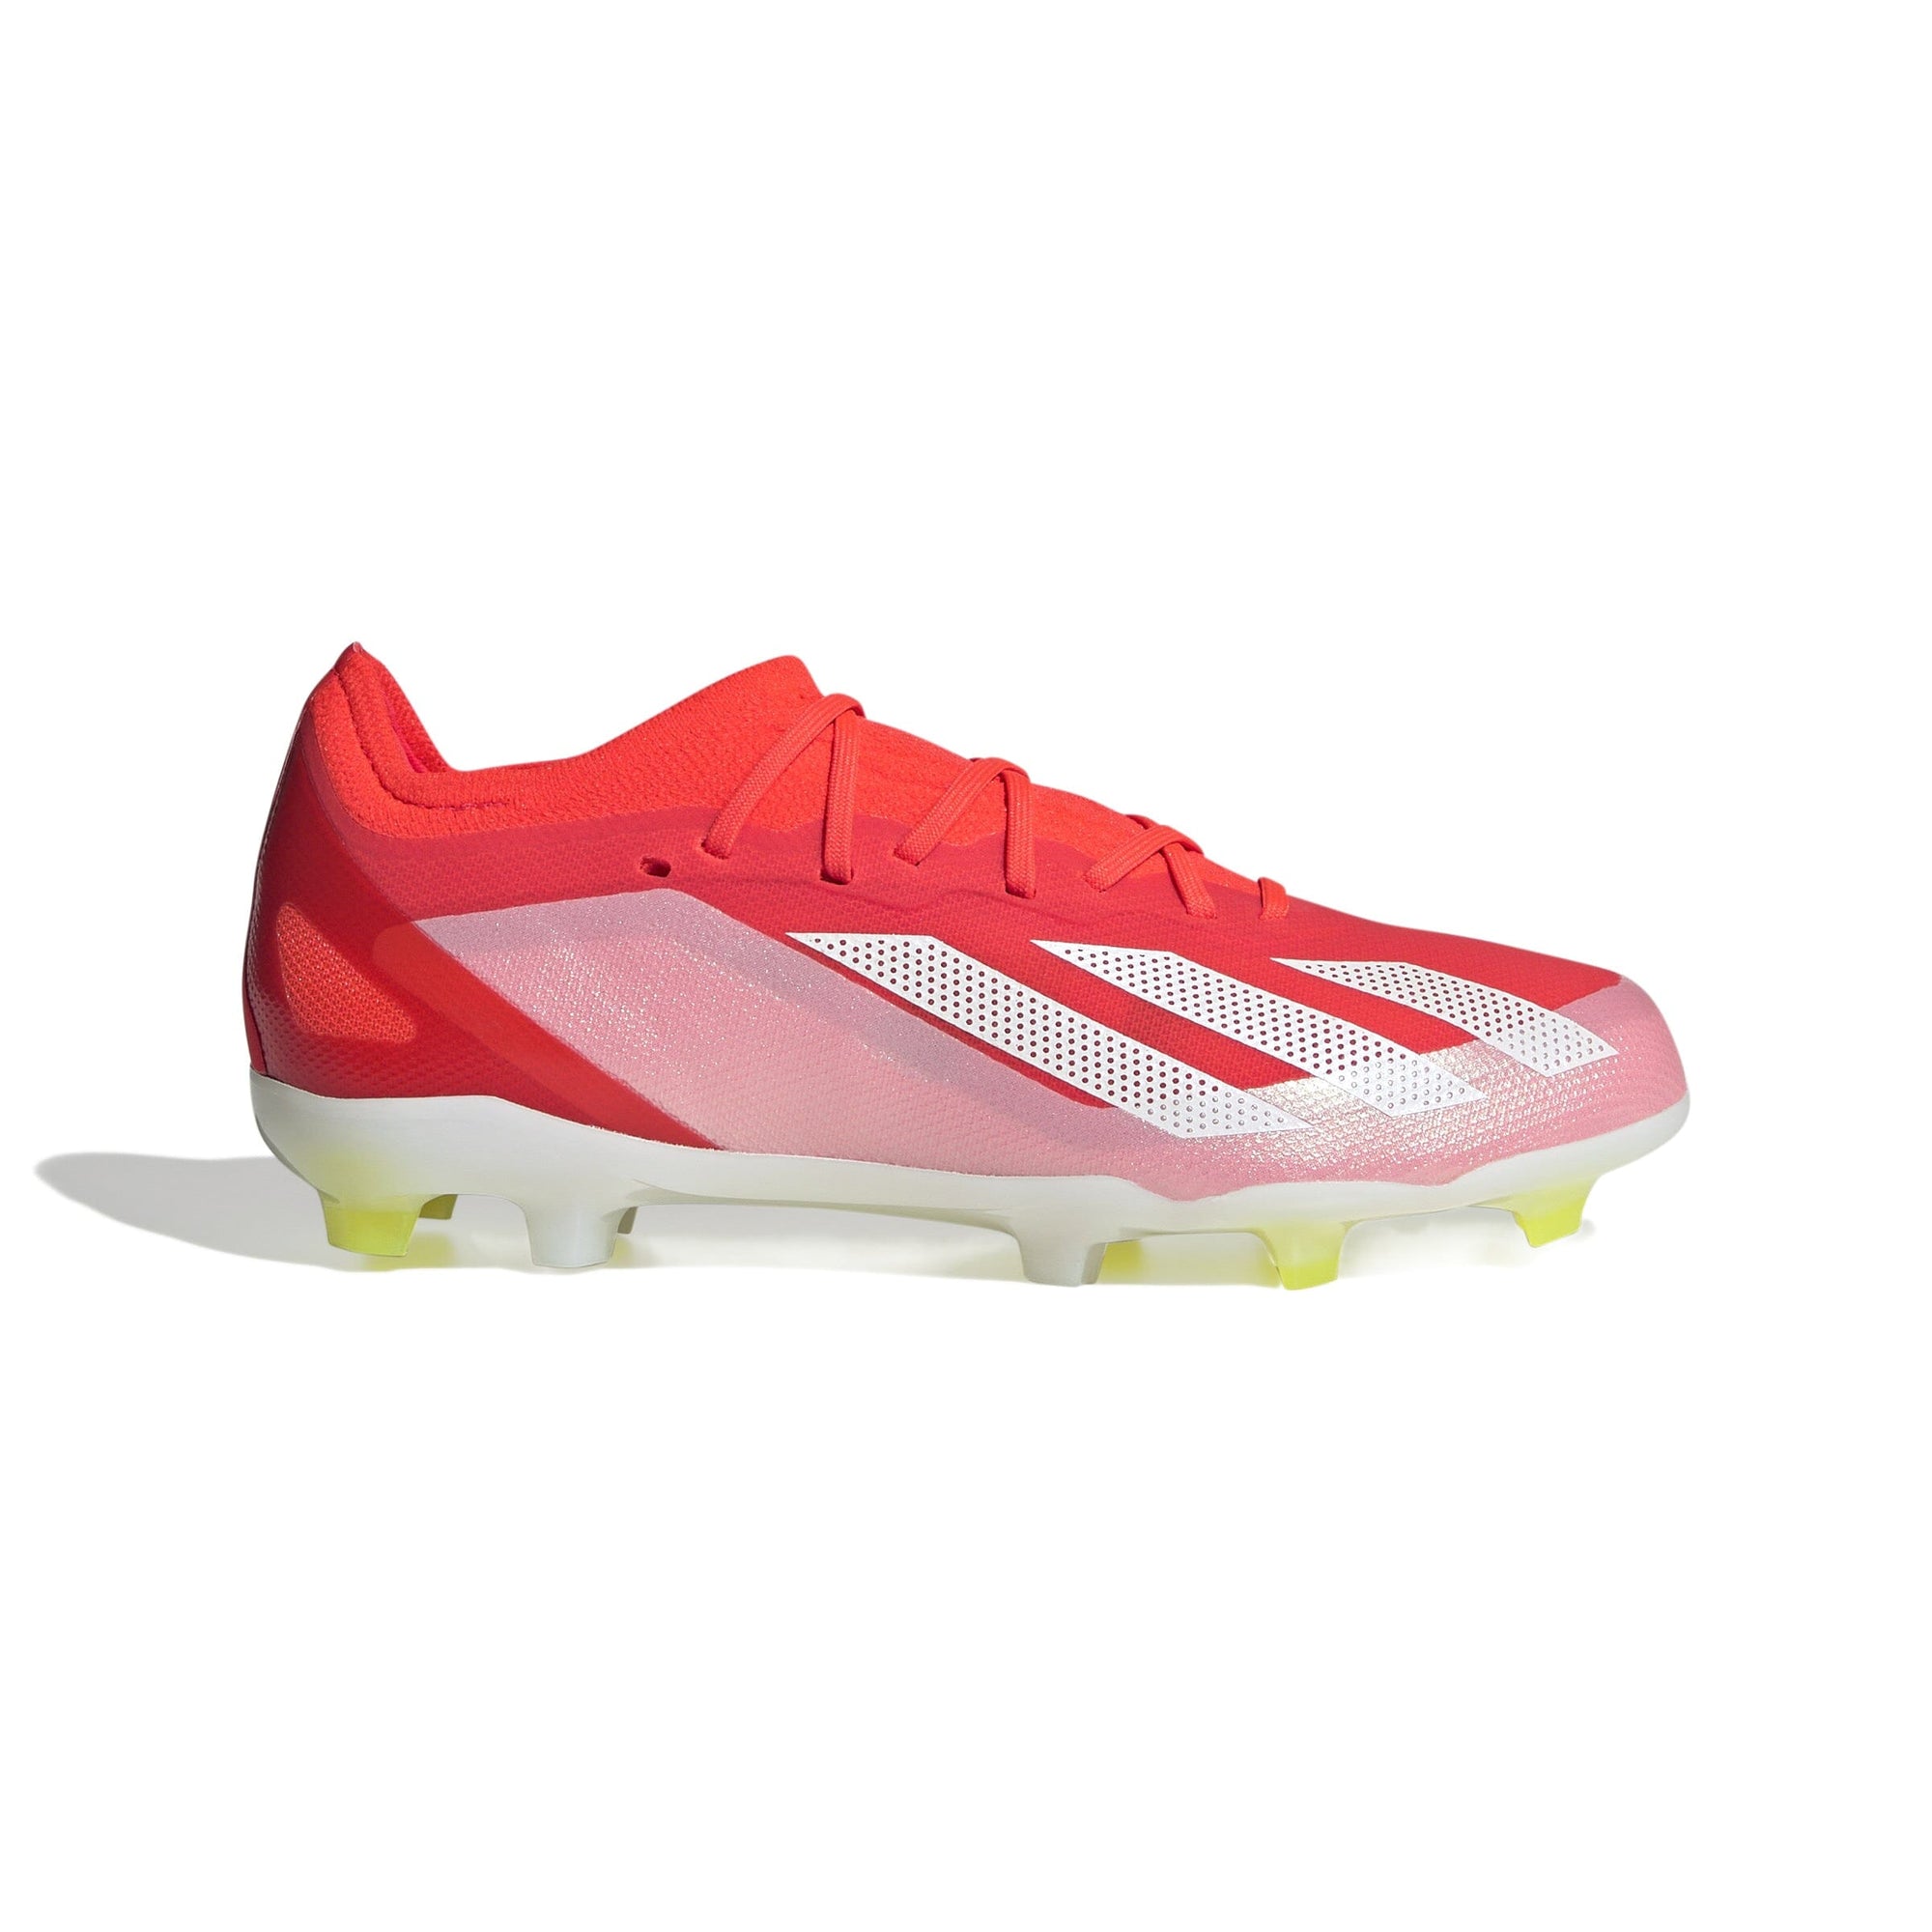 adidas Youth X Crazyfast Elite Firm Ground Cleats | IF0670 Shoes Adidas 1 Solar Red / Cloud White / Team Solar Yellow 2 